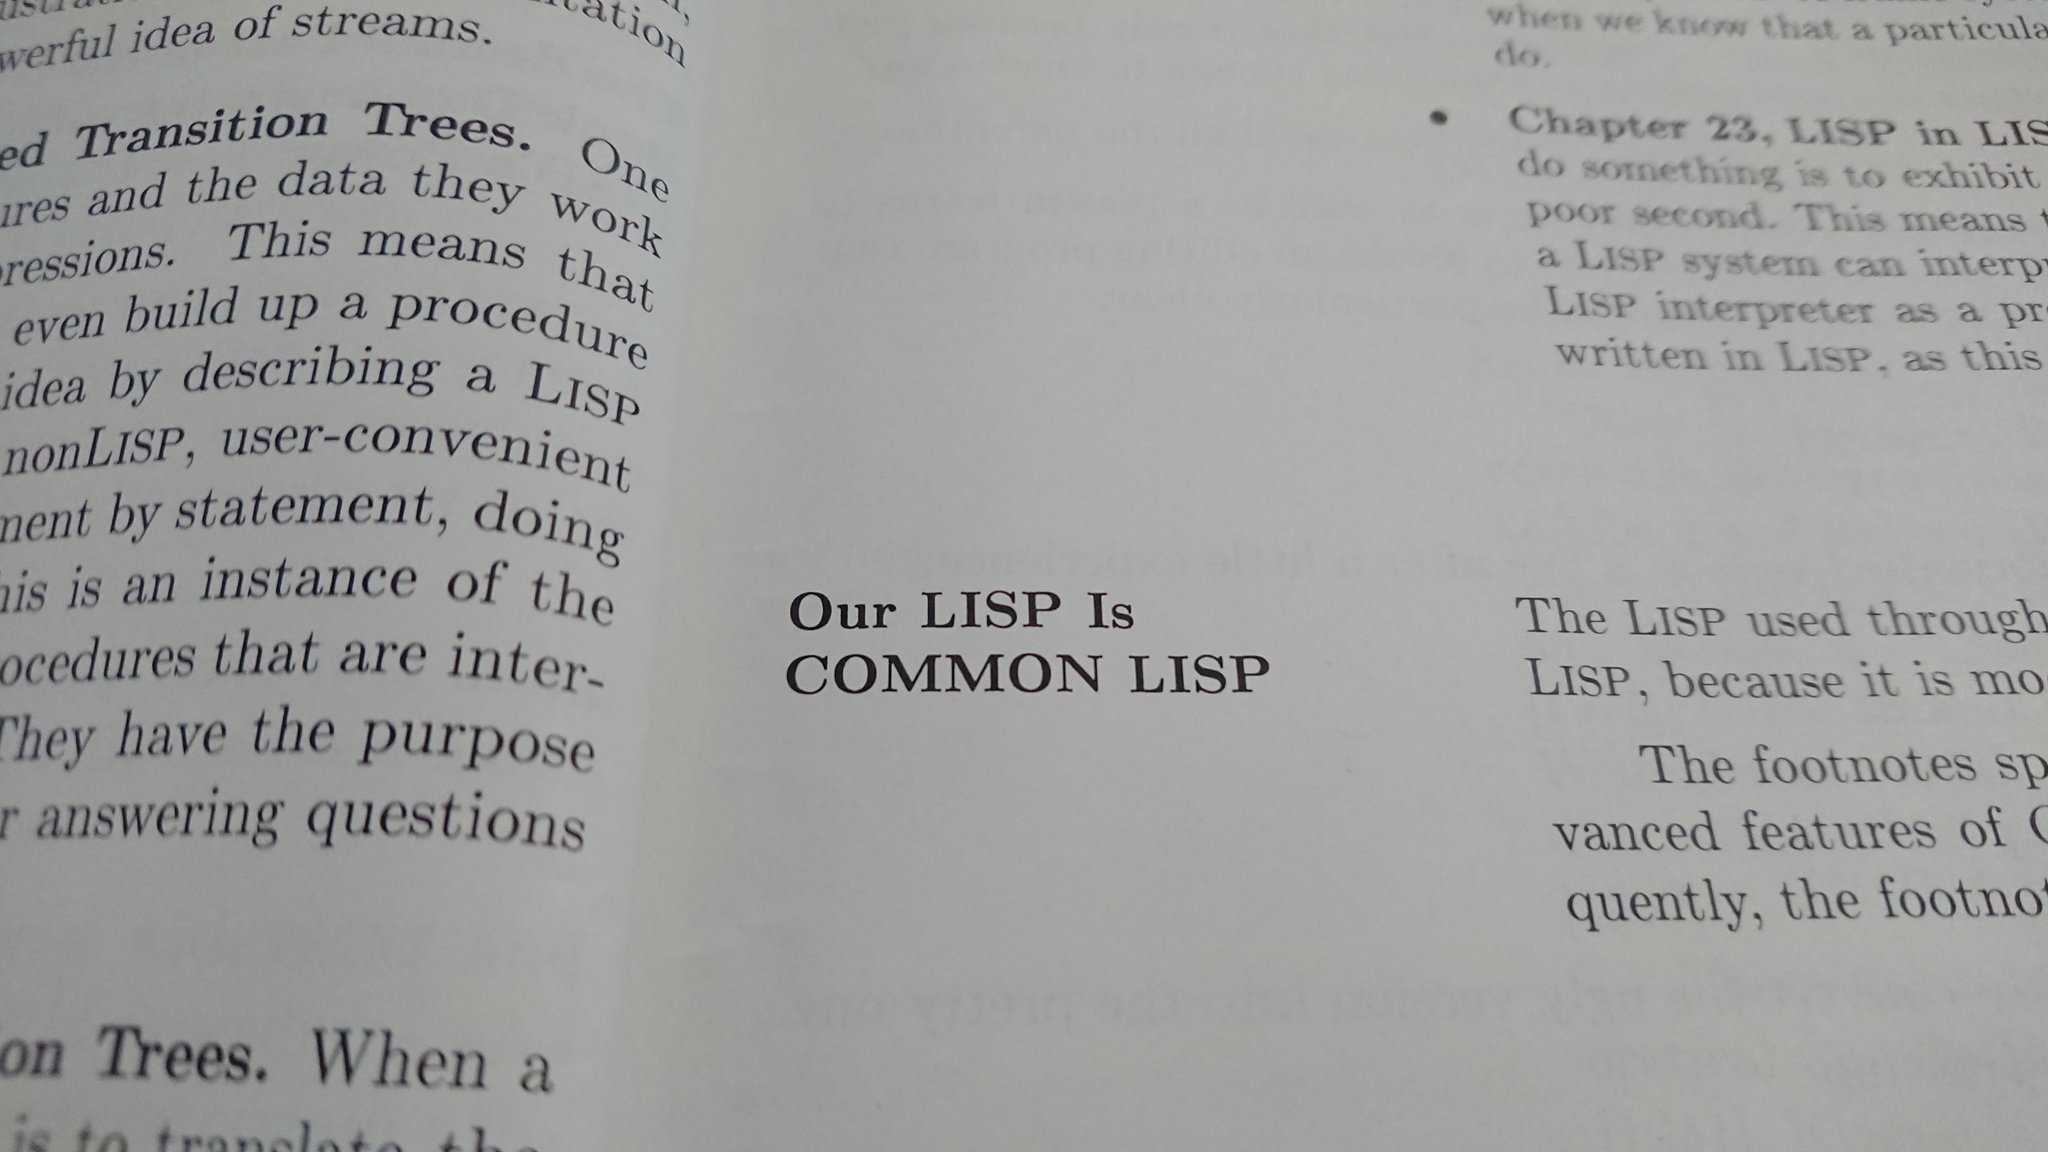 Our LISP is COMMON LISP, from:  Lisp 2nd edition by Winston and Horn, Addison Wesley, 1984; click for a larger version (198 kB).